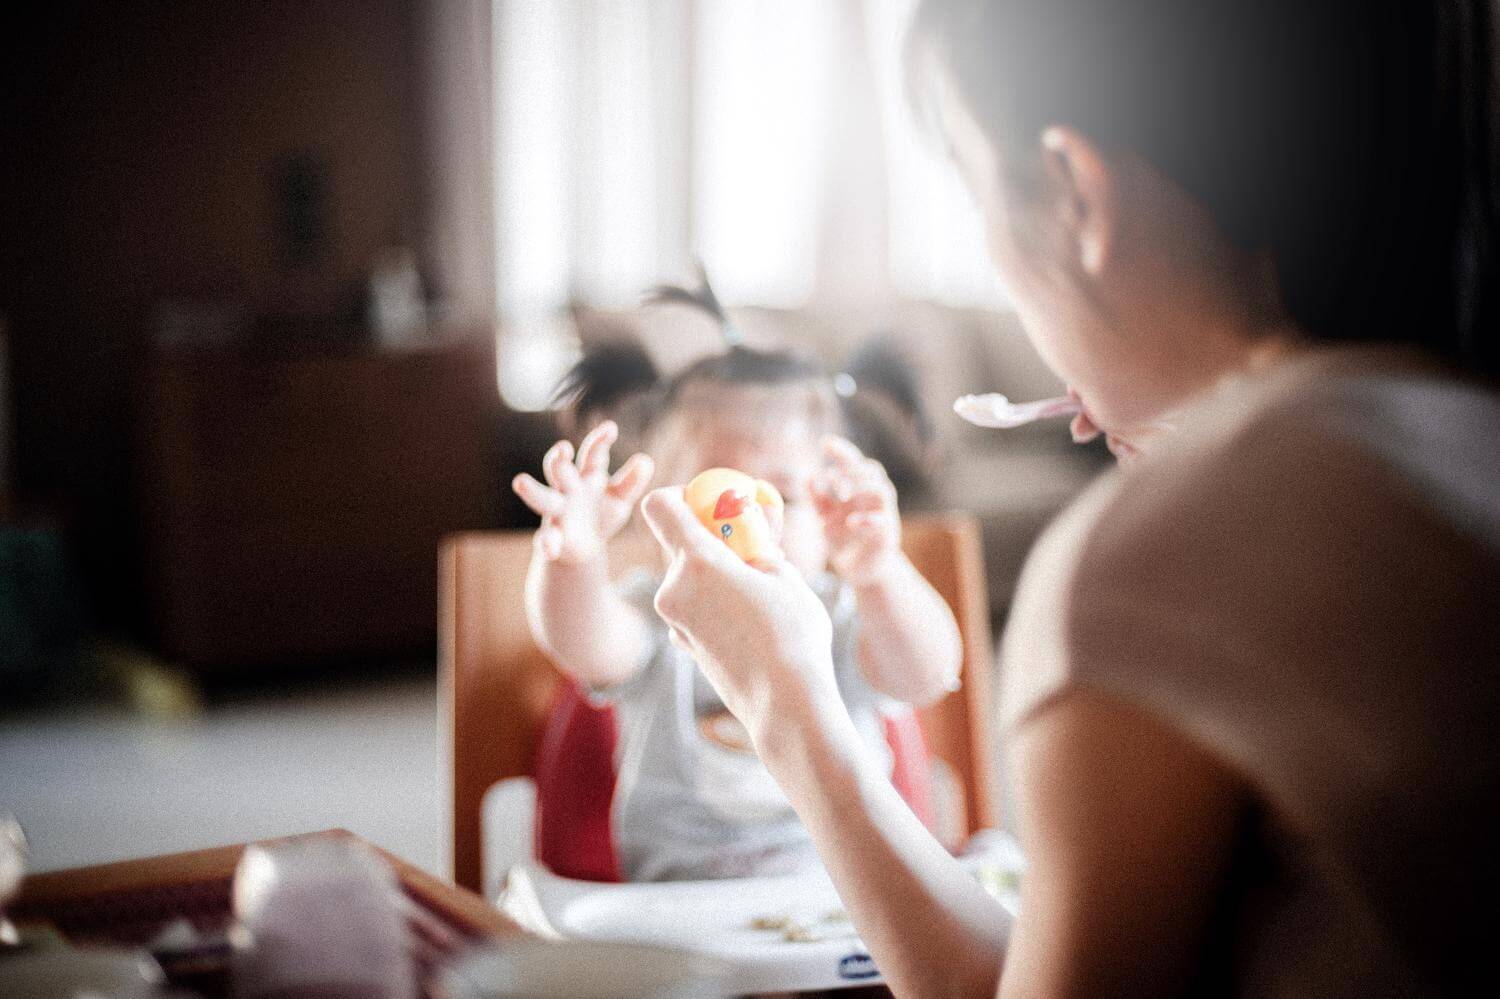 A toddler reaches for a toy as her female caregiver is holding a small spoon with food. 